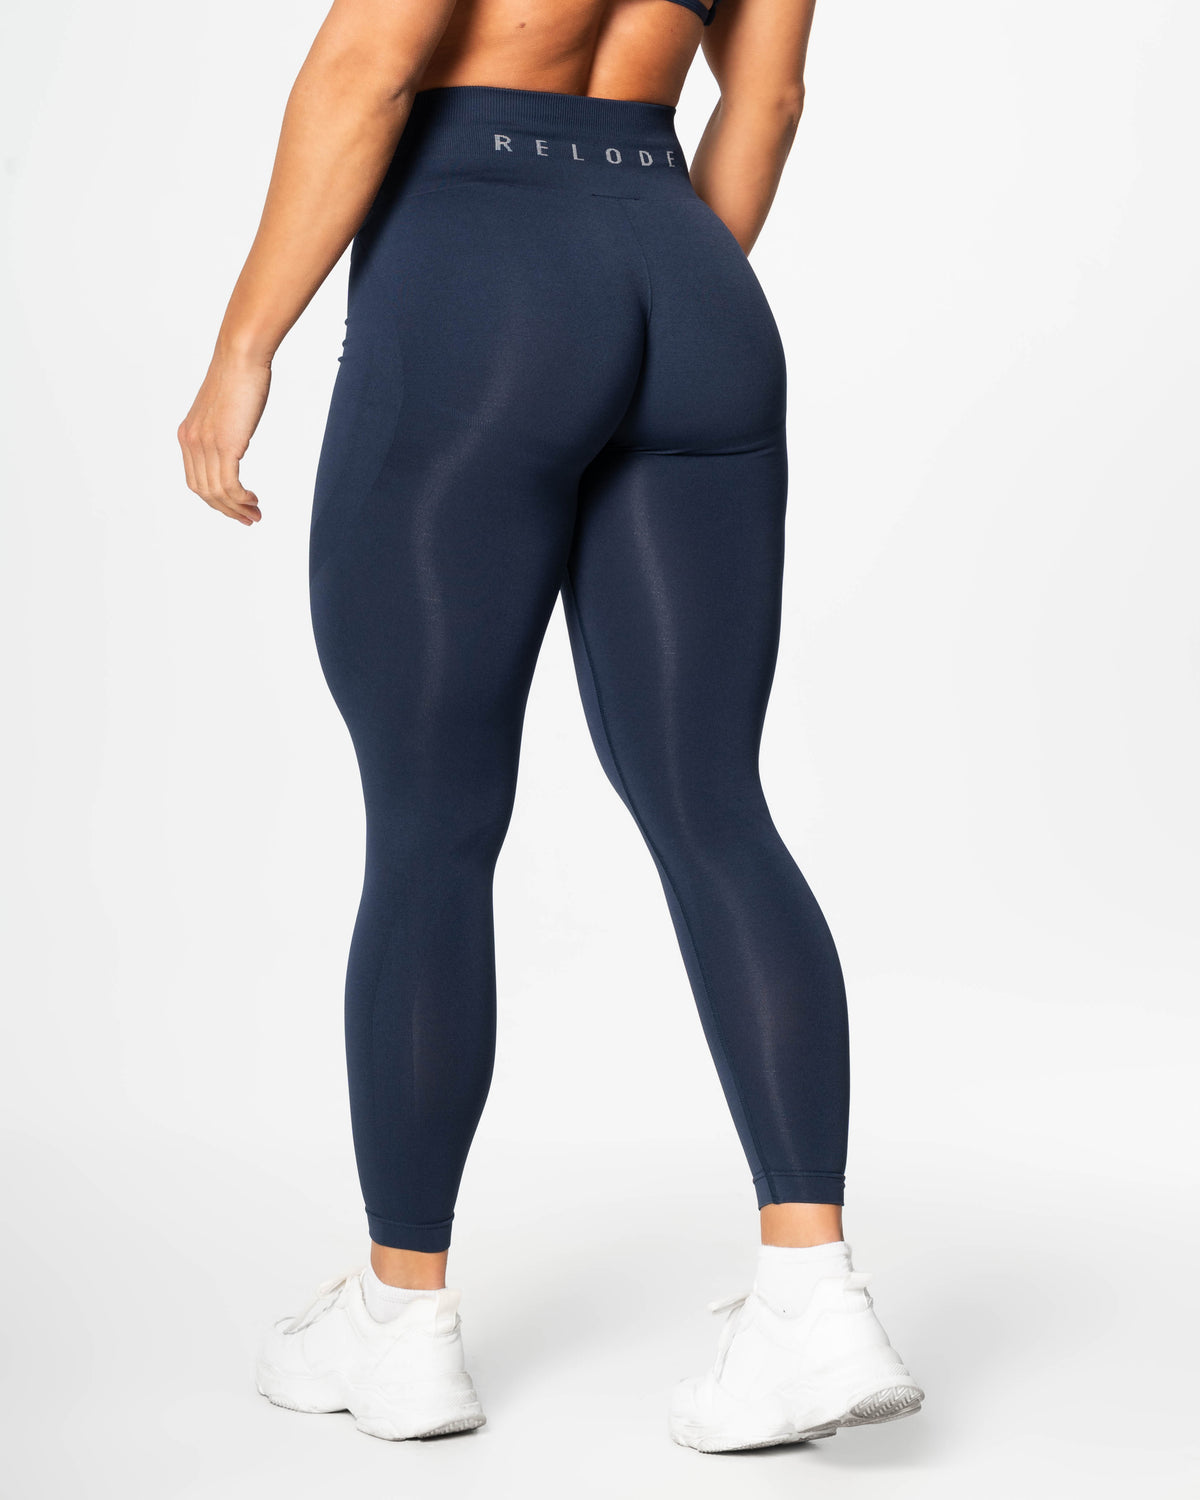 Prime Seamless Tights - Blue